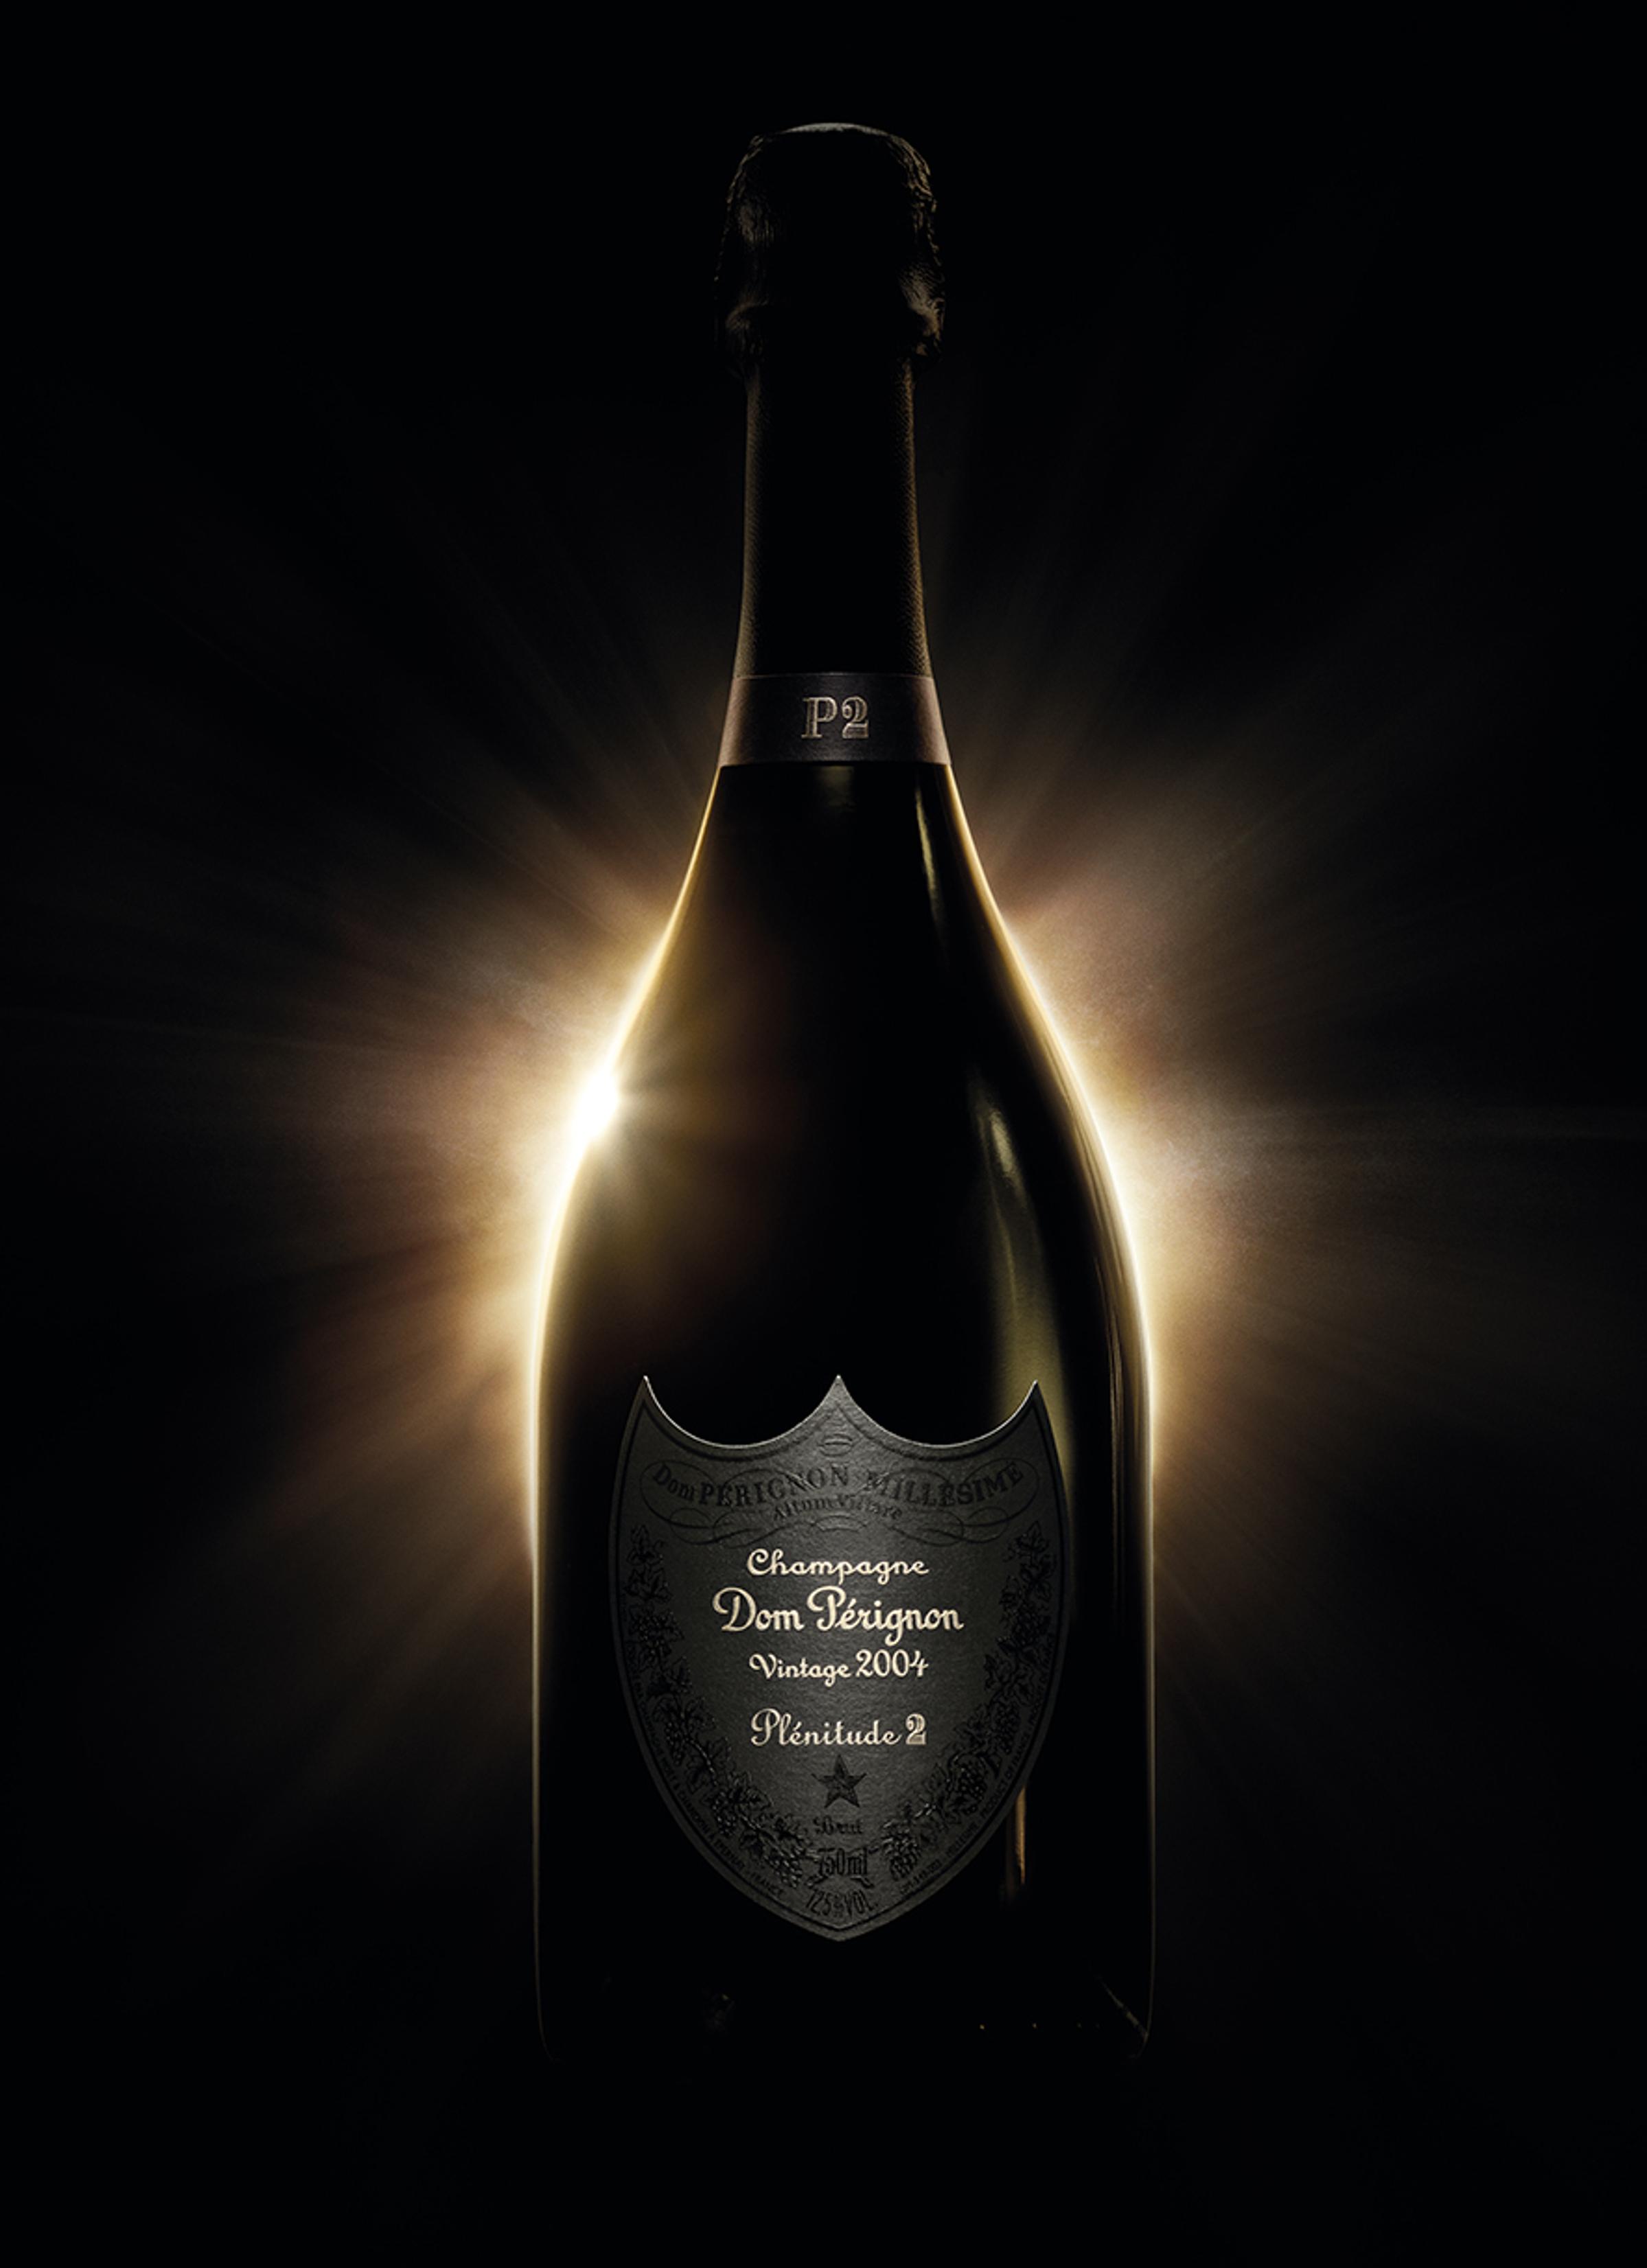 Dom Pérignon Brut Vintage Champagne 2012  Dom Pérignon is the most famous  Champagne in the world, and for good reason. The bouquet sparkles with  delicate fresh violets in a setting of